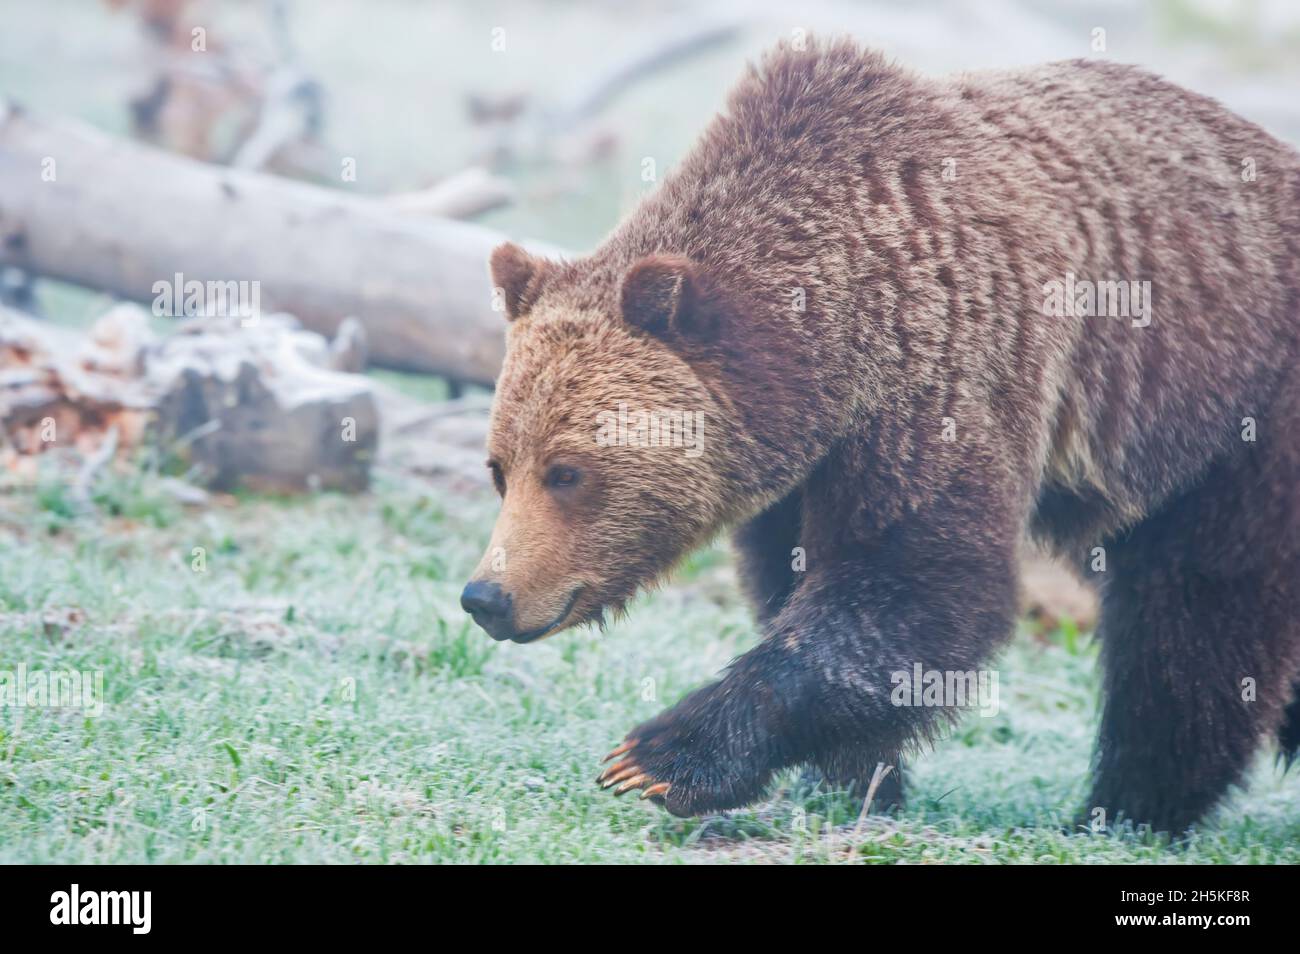 Close-up of a brown bear (Ursus arctos) walking along the grass on a misty day looking for food; Yellowstone National Park, United States of America Stock Photo